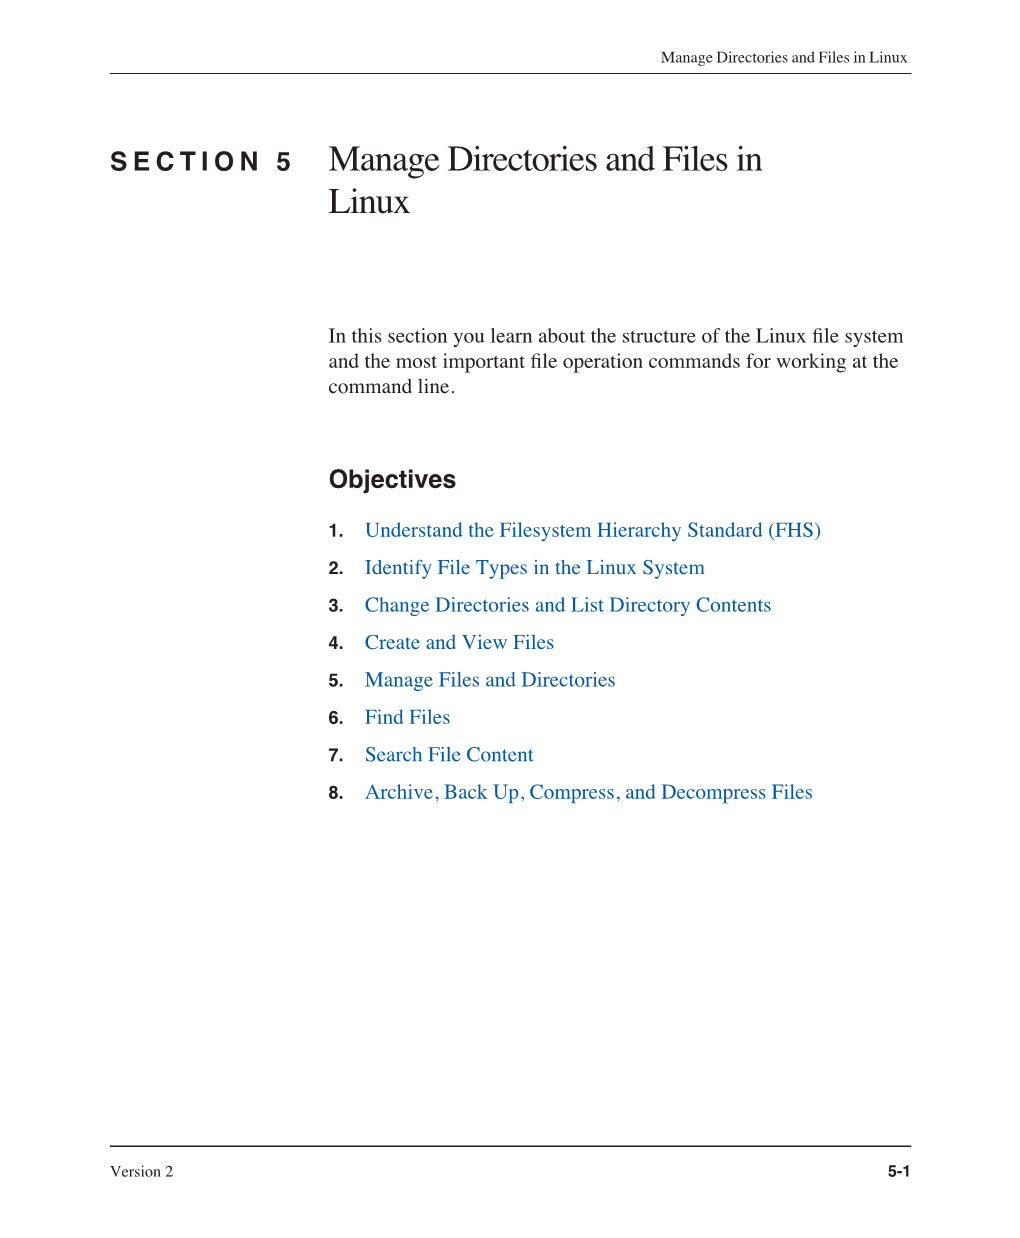 Manage Directories and Files in Linux